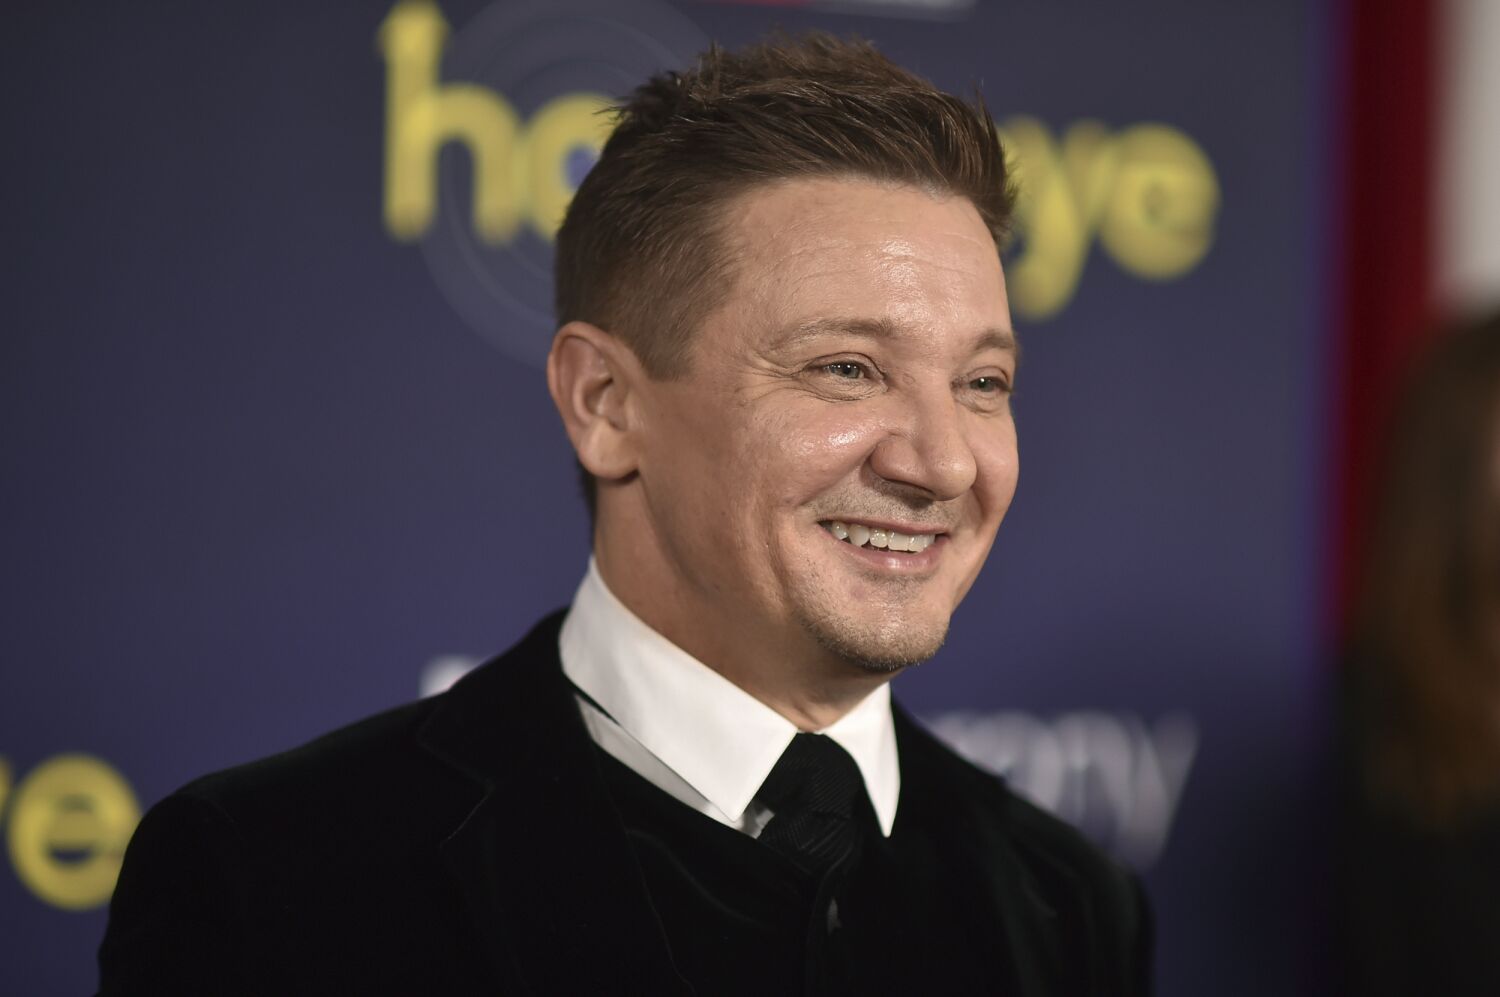 Jeremy Renner says new Disney+ series is coming 'as soon as I'm back on my feet'